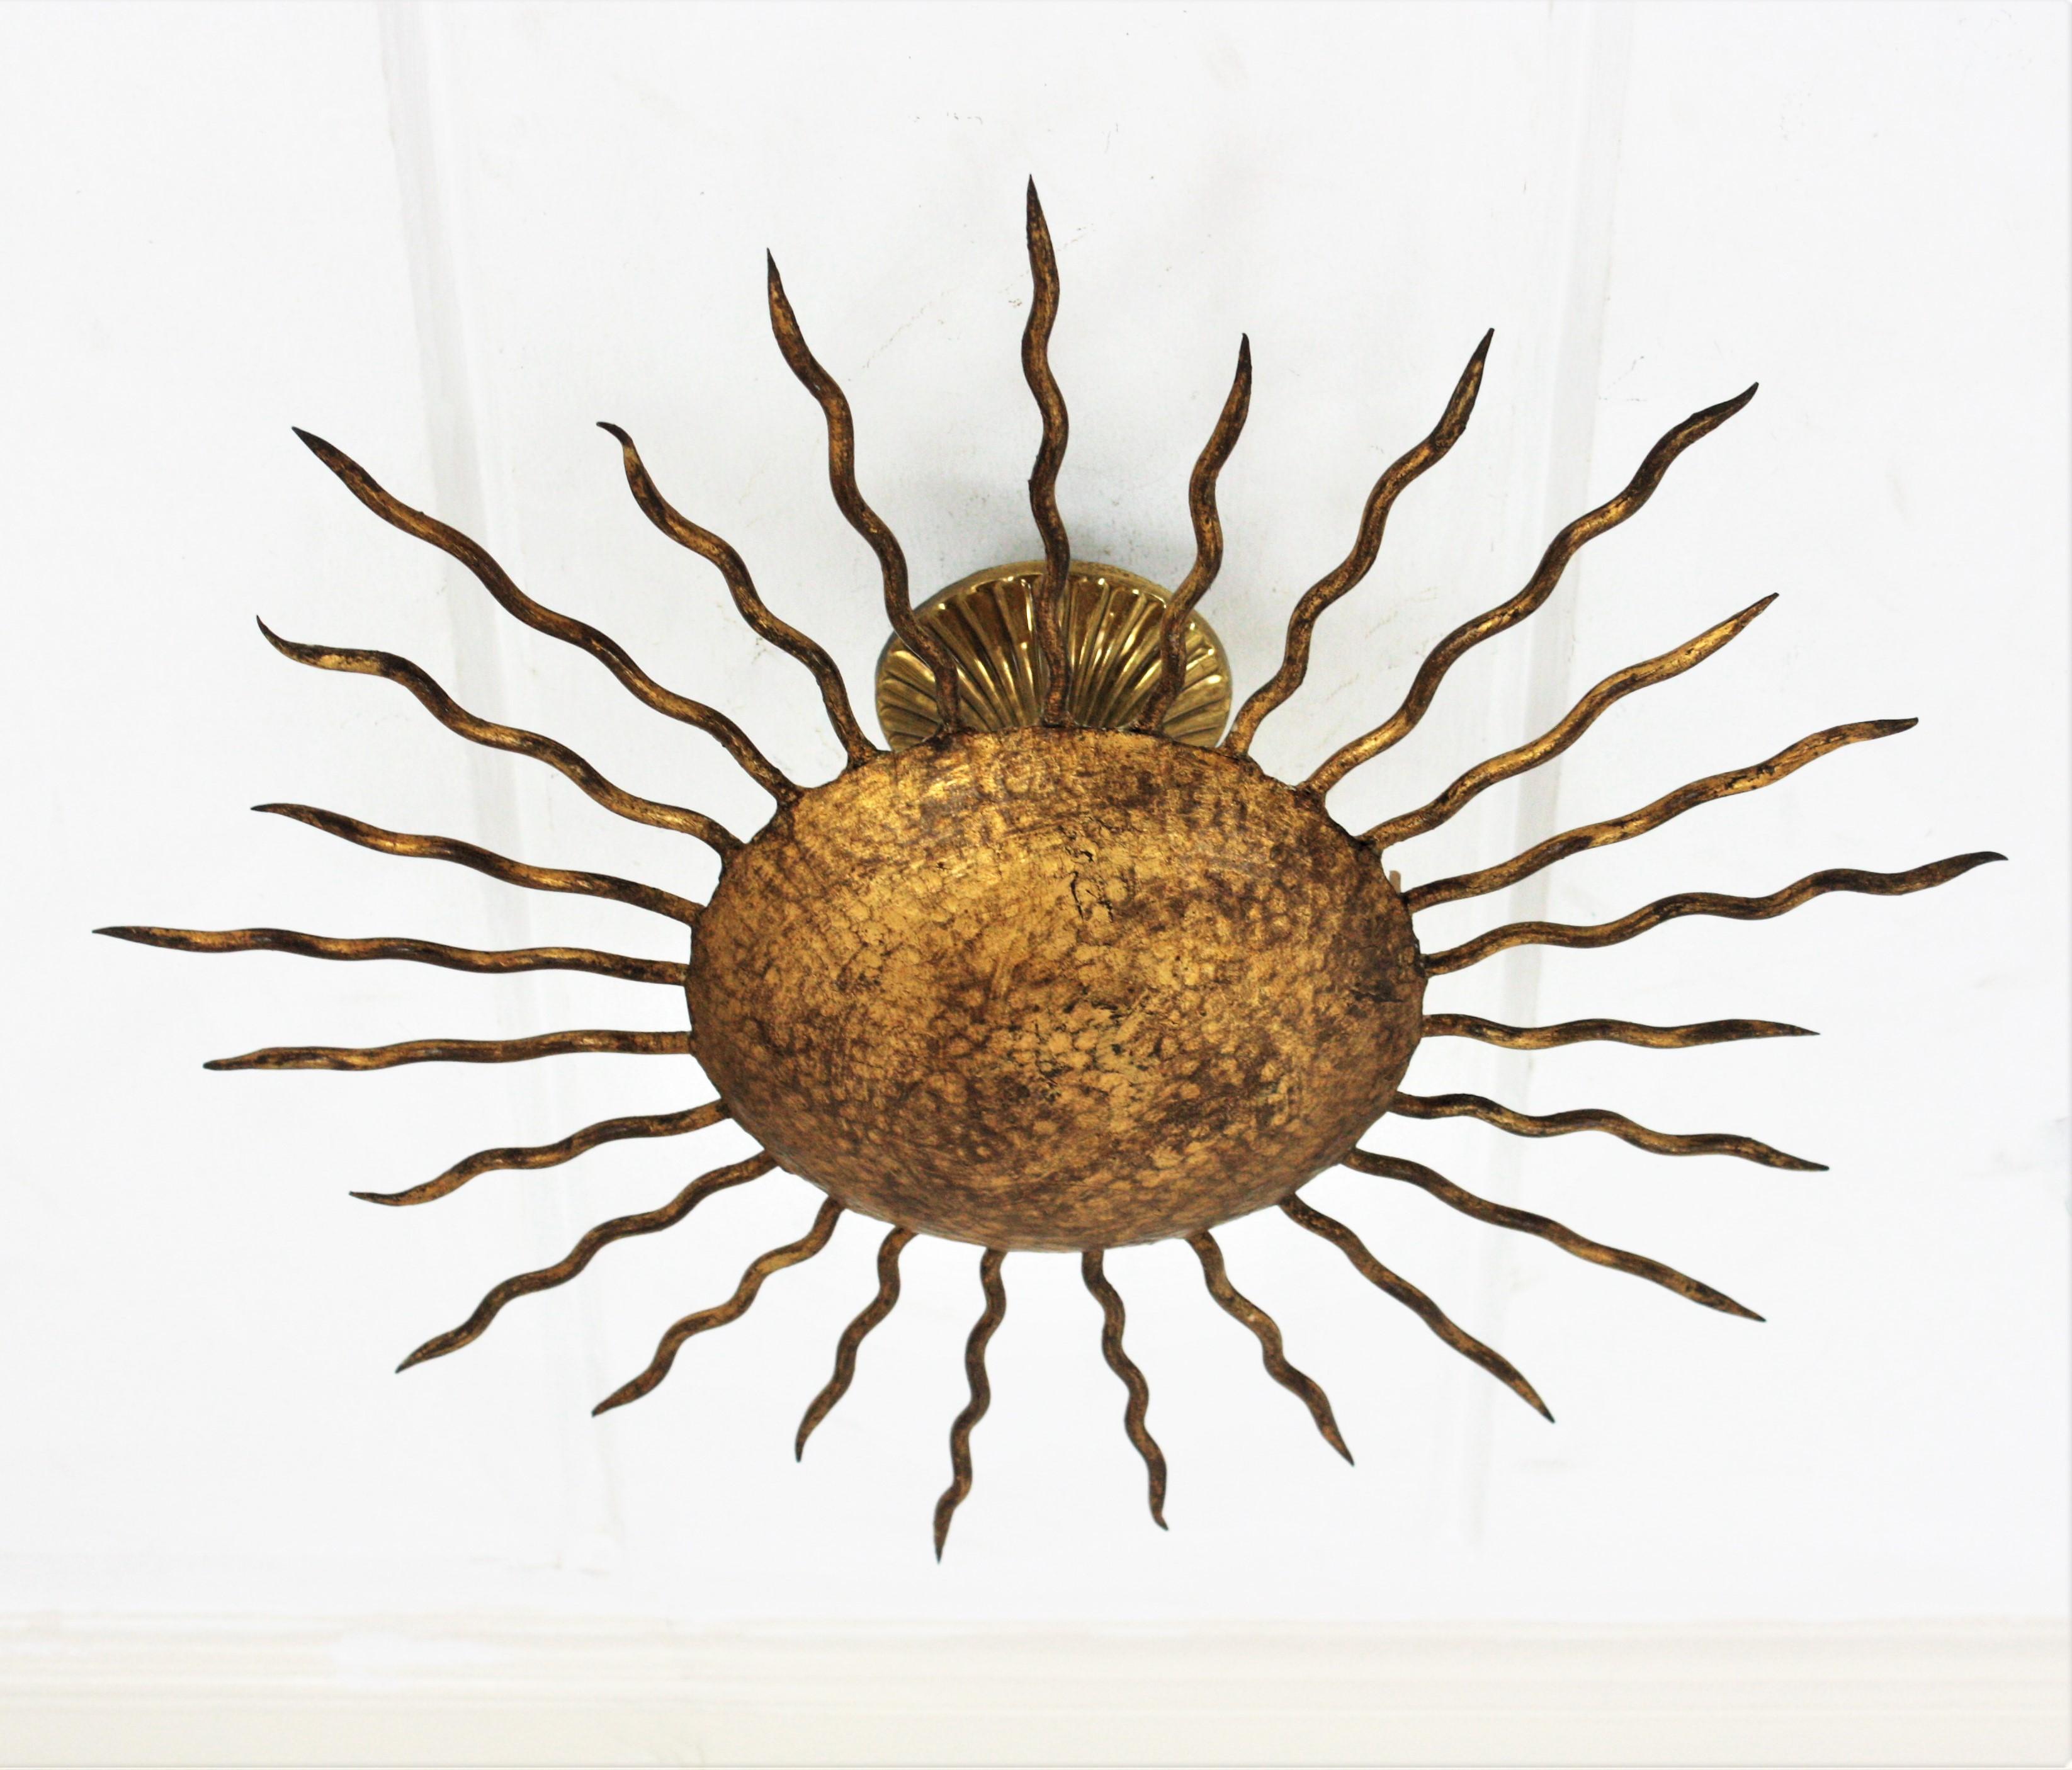 Gold leaf gilt wrought iron sunburst flush mount, Spain, 1950s.
Hand-hammered sunburst light fixture richly decorated in the central part by the hammer marks. Curly iron rays surrounding the central sphere.
Original gold leaf gilding and nice